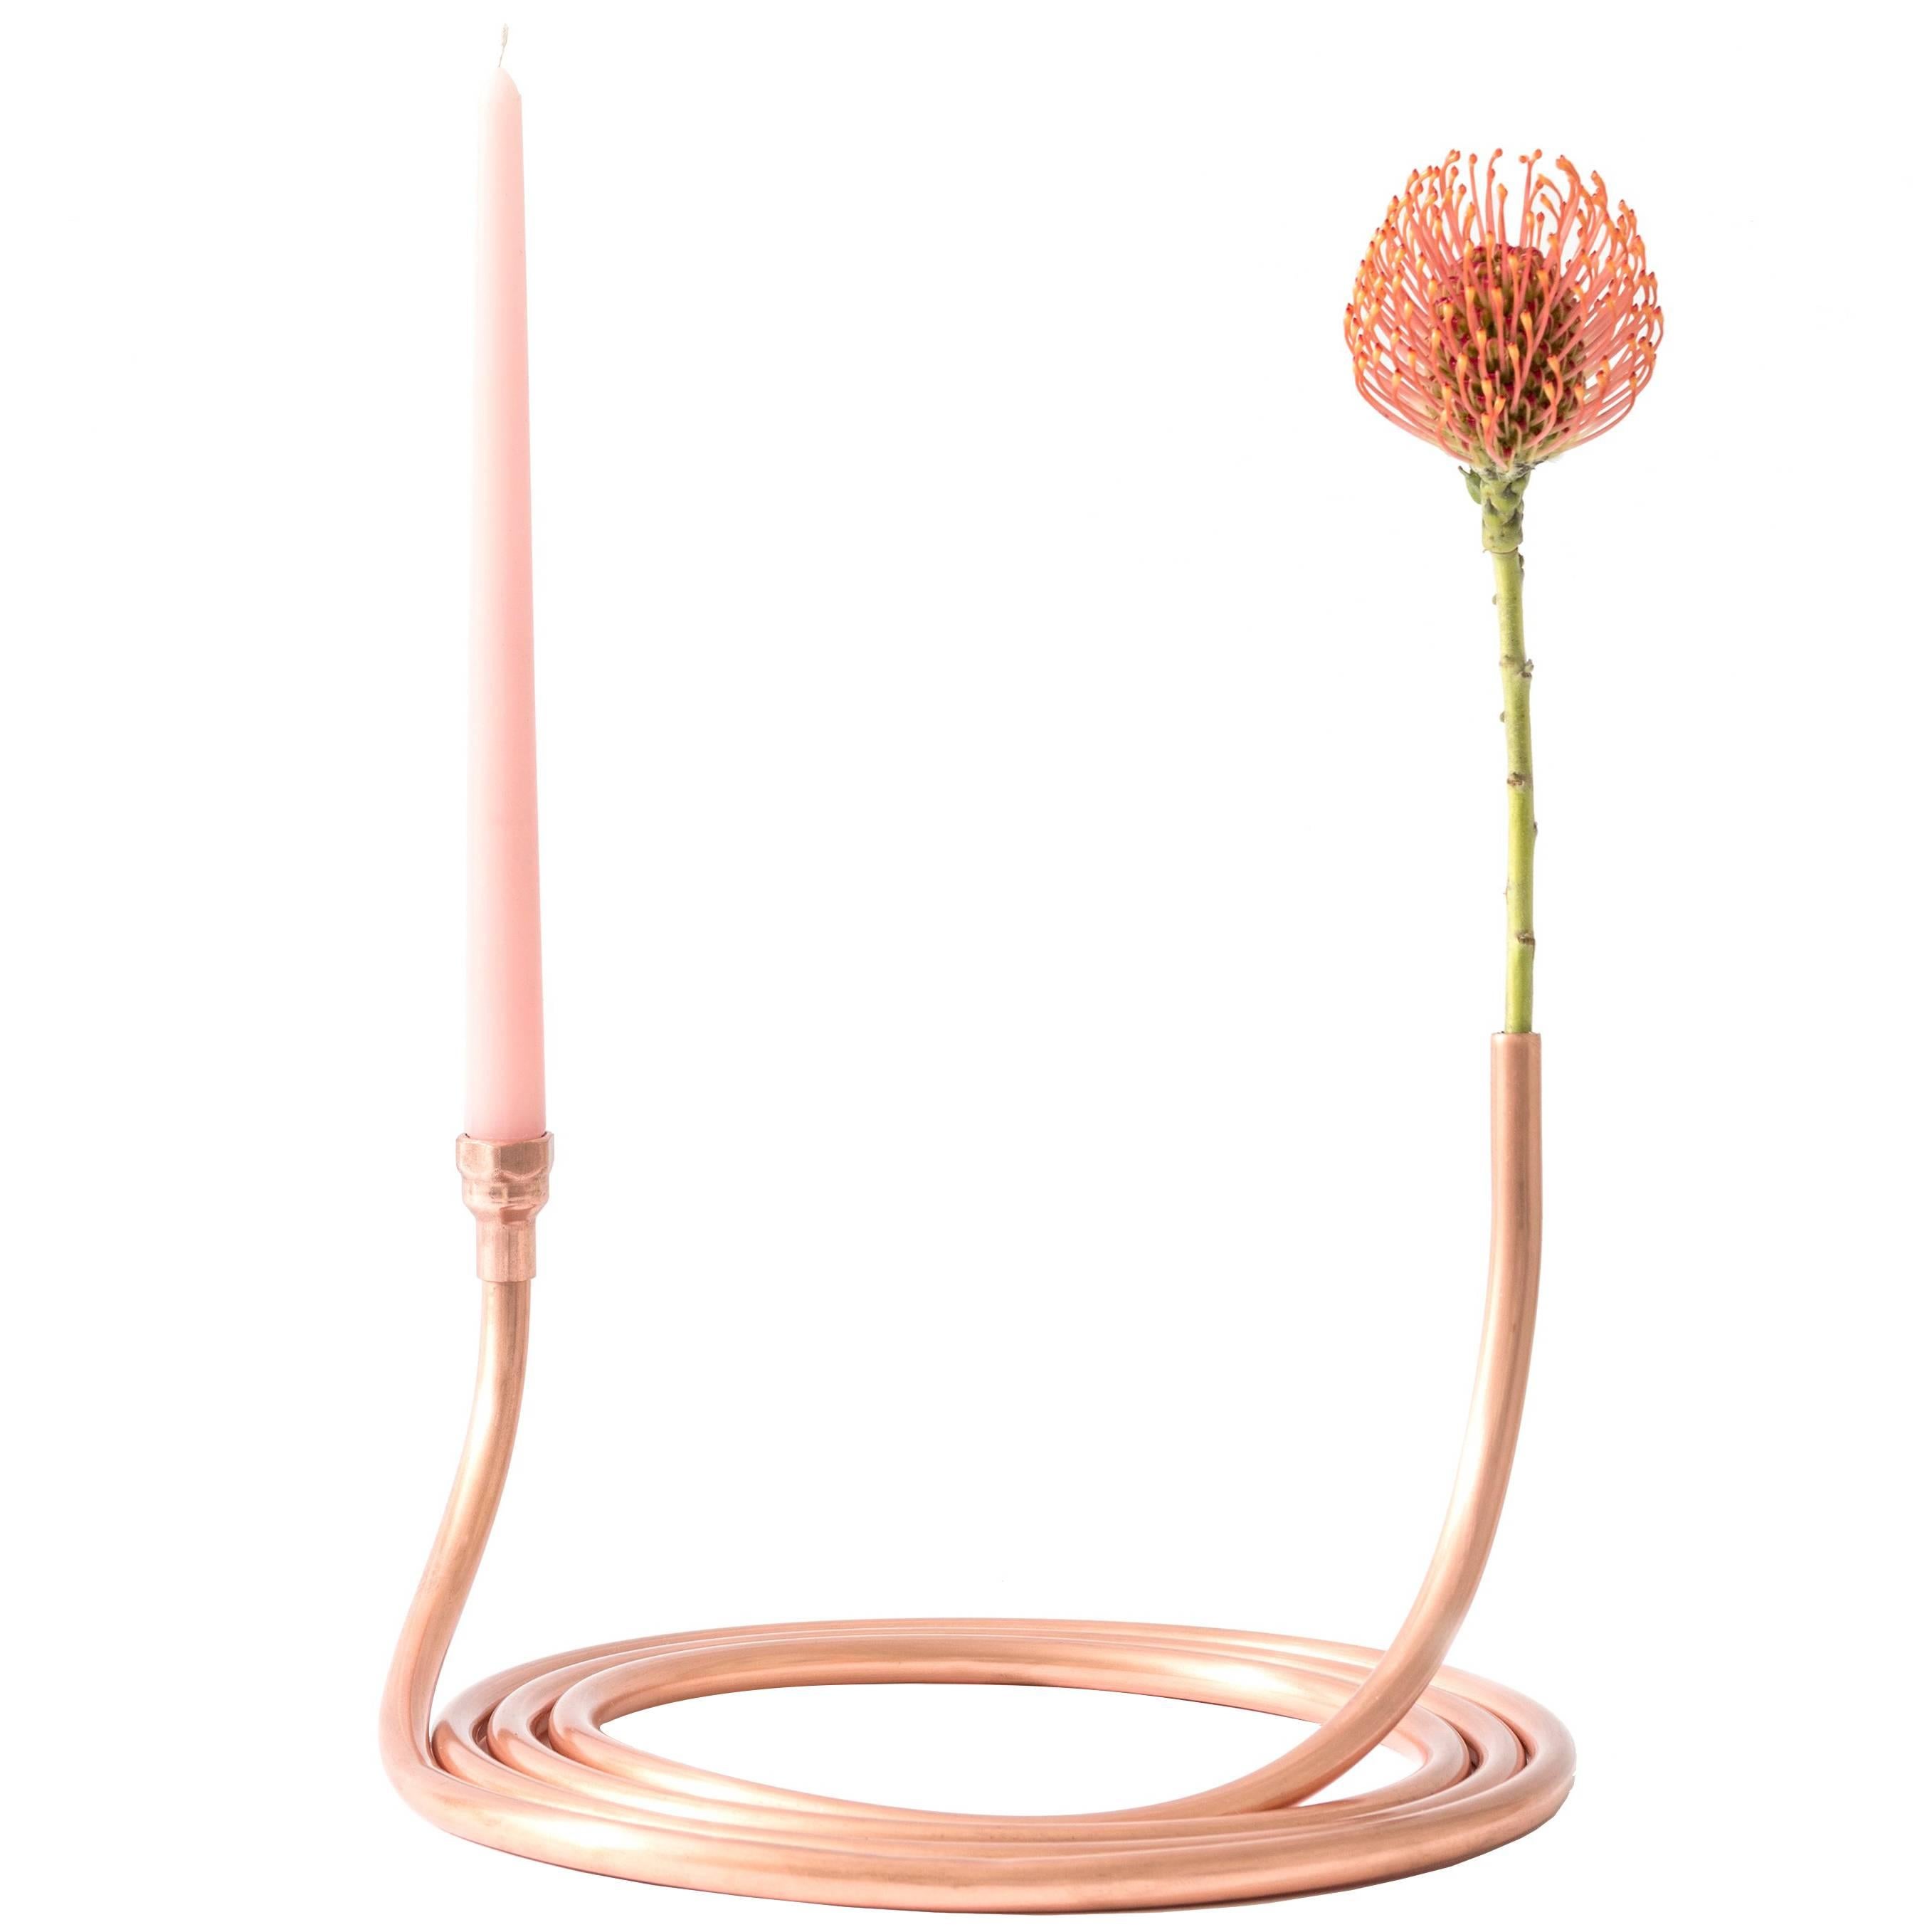 Contemporary Minimalist Spiral Copper Shibui Vase with Flower and Candleholder For Sale